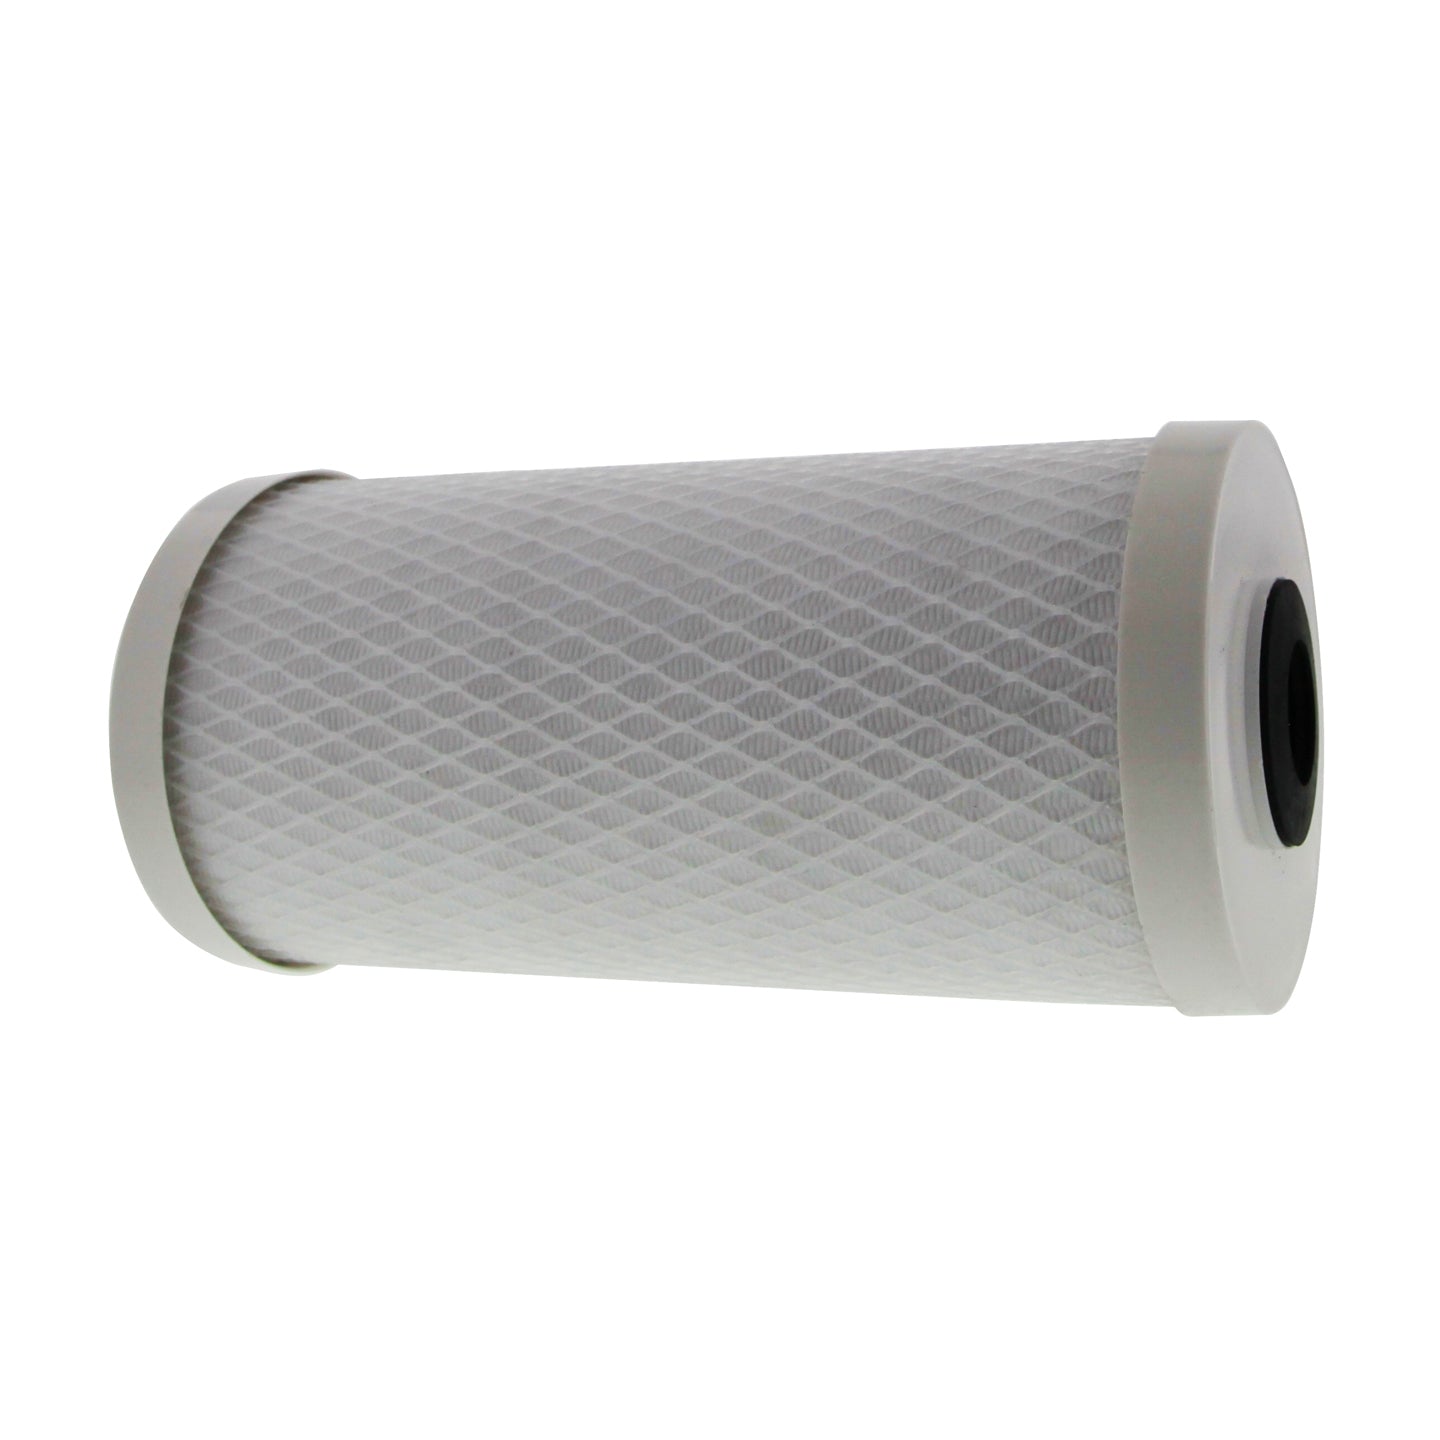 CBC-BB Pentek Comparable Water Filter Cartridge by Tier1 (side)